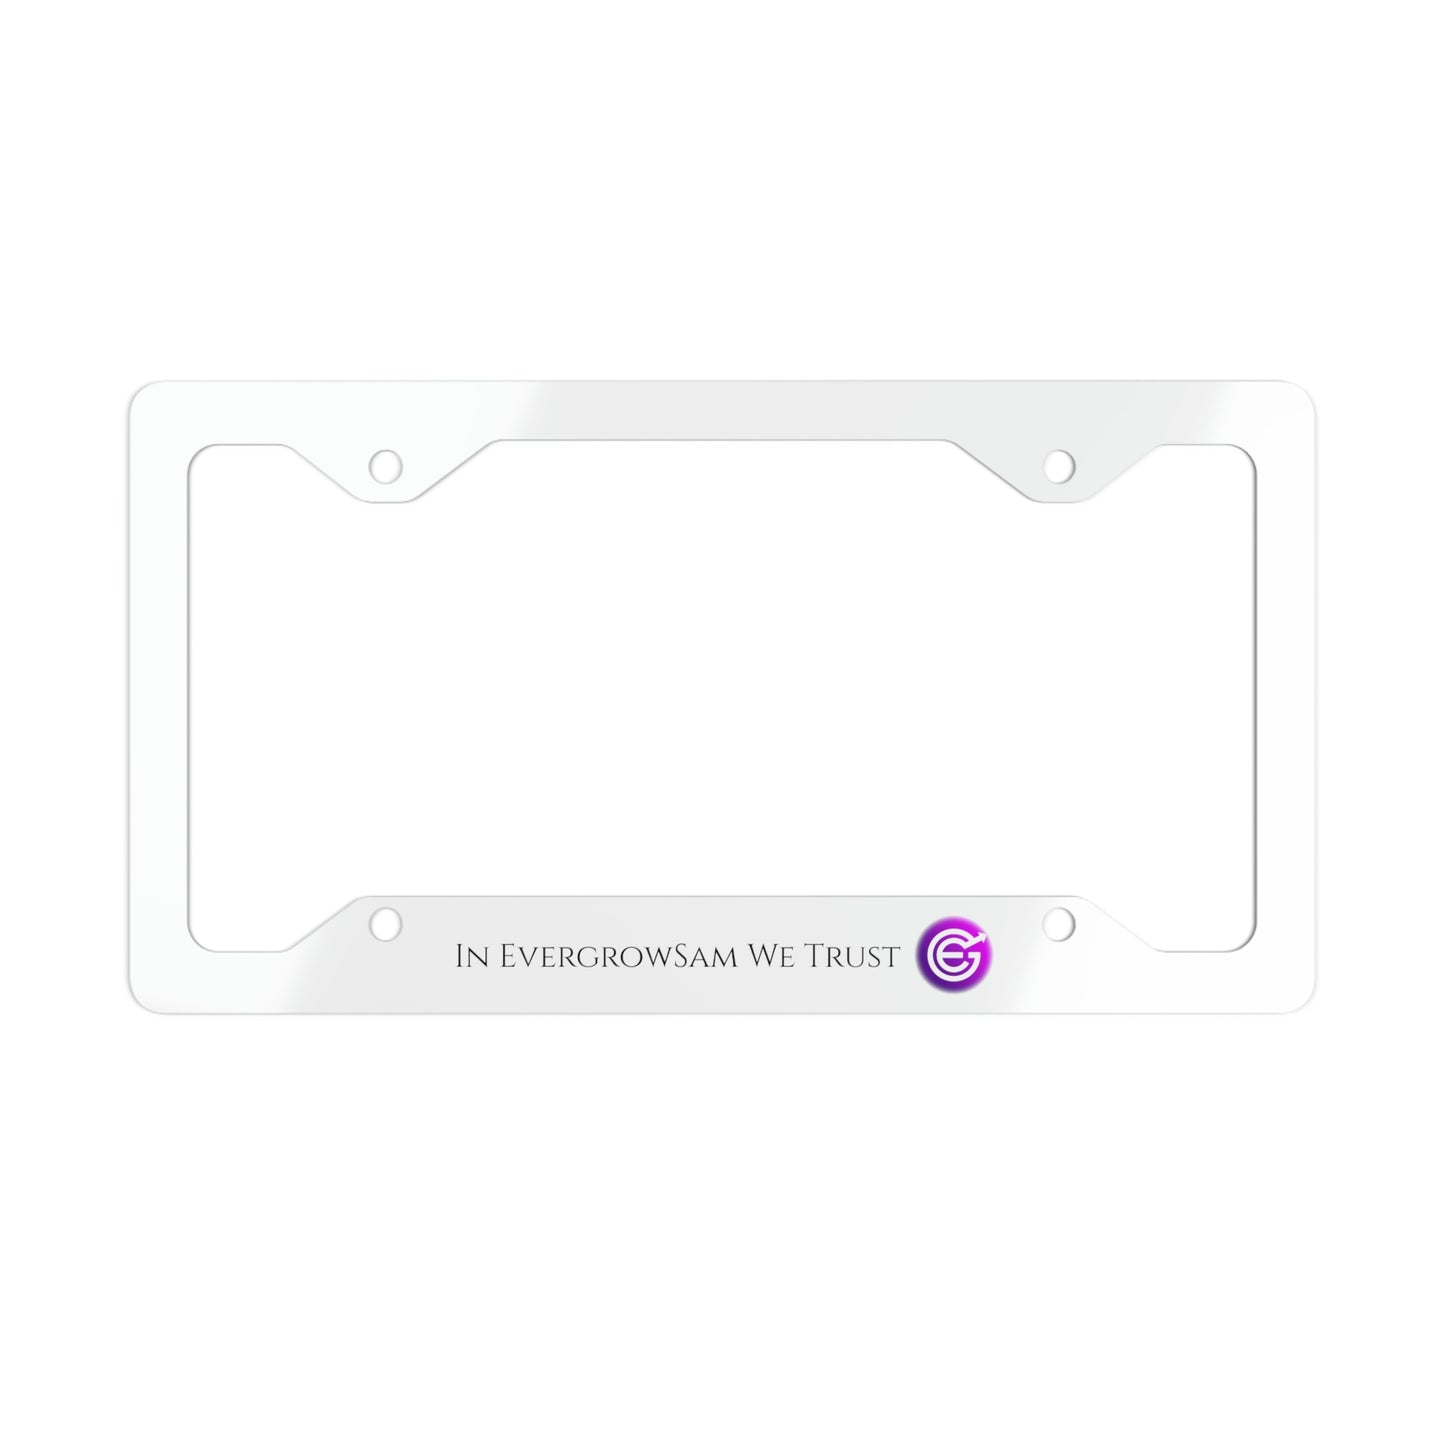 USA - Metal License Plate Frame - In EverGrowSam We Trust with EverGrow logo